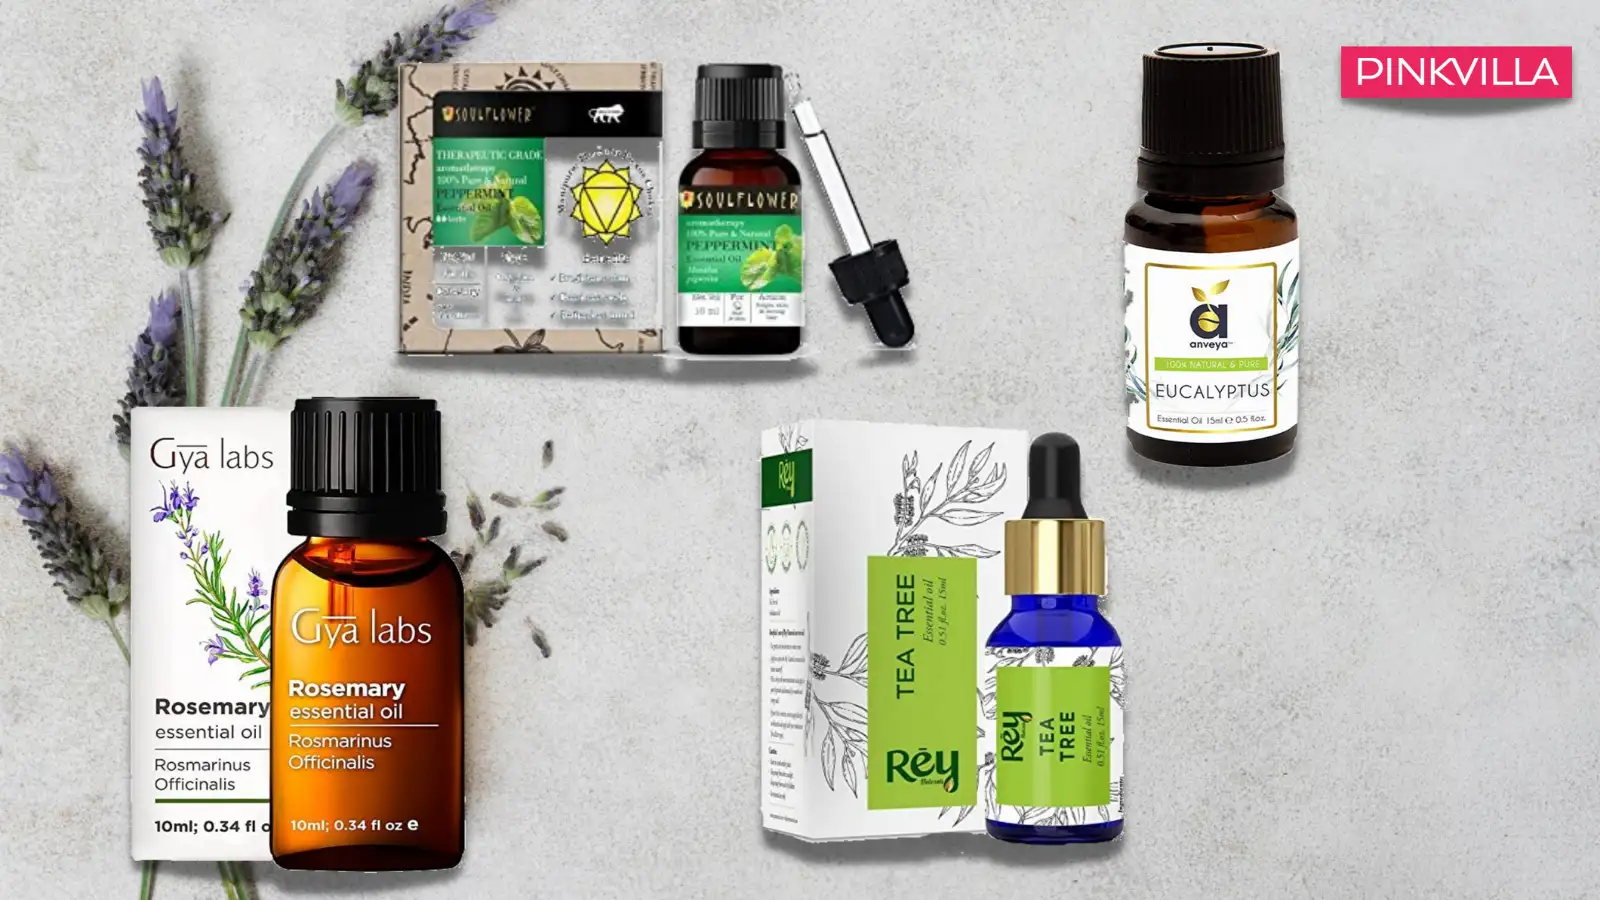 10 hair growth oils that can help your mane grow long and strong   HealthShots